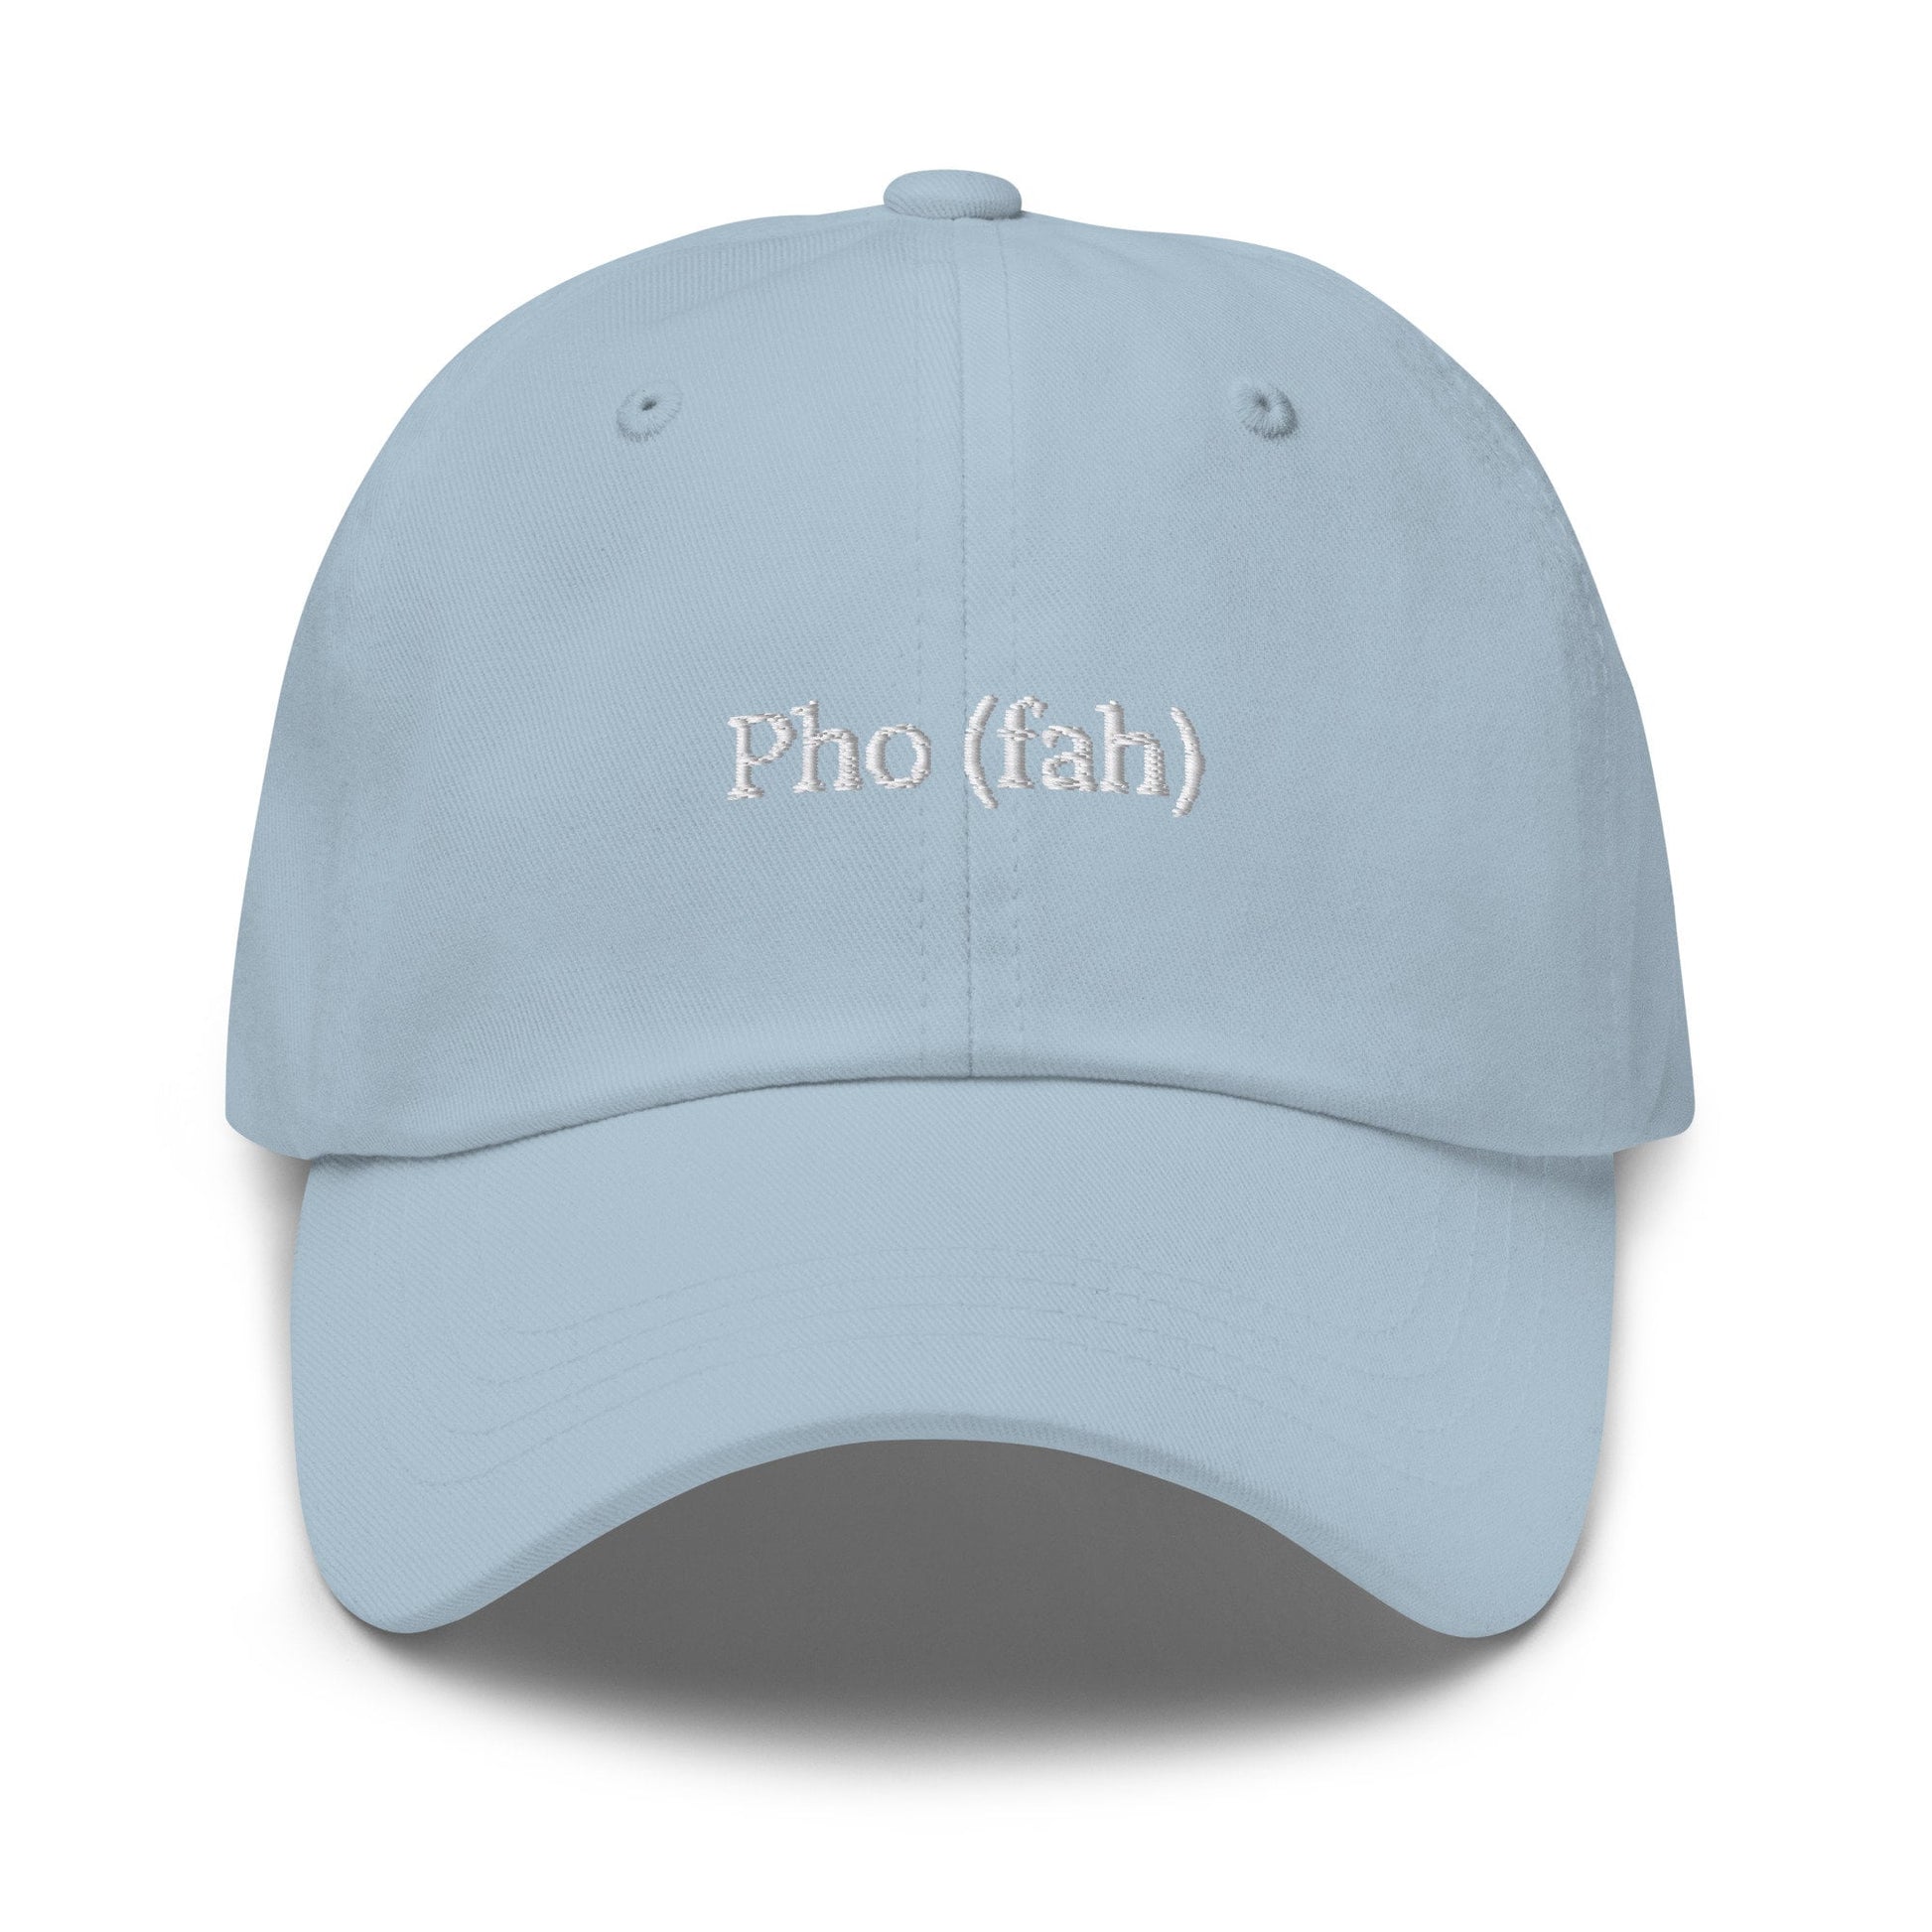 Pho Dad Hat - Gift for Brothy Viet Soup Lovers - Embroidered Cotton Hat - Multiple Colors